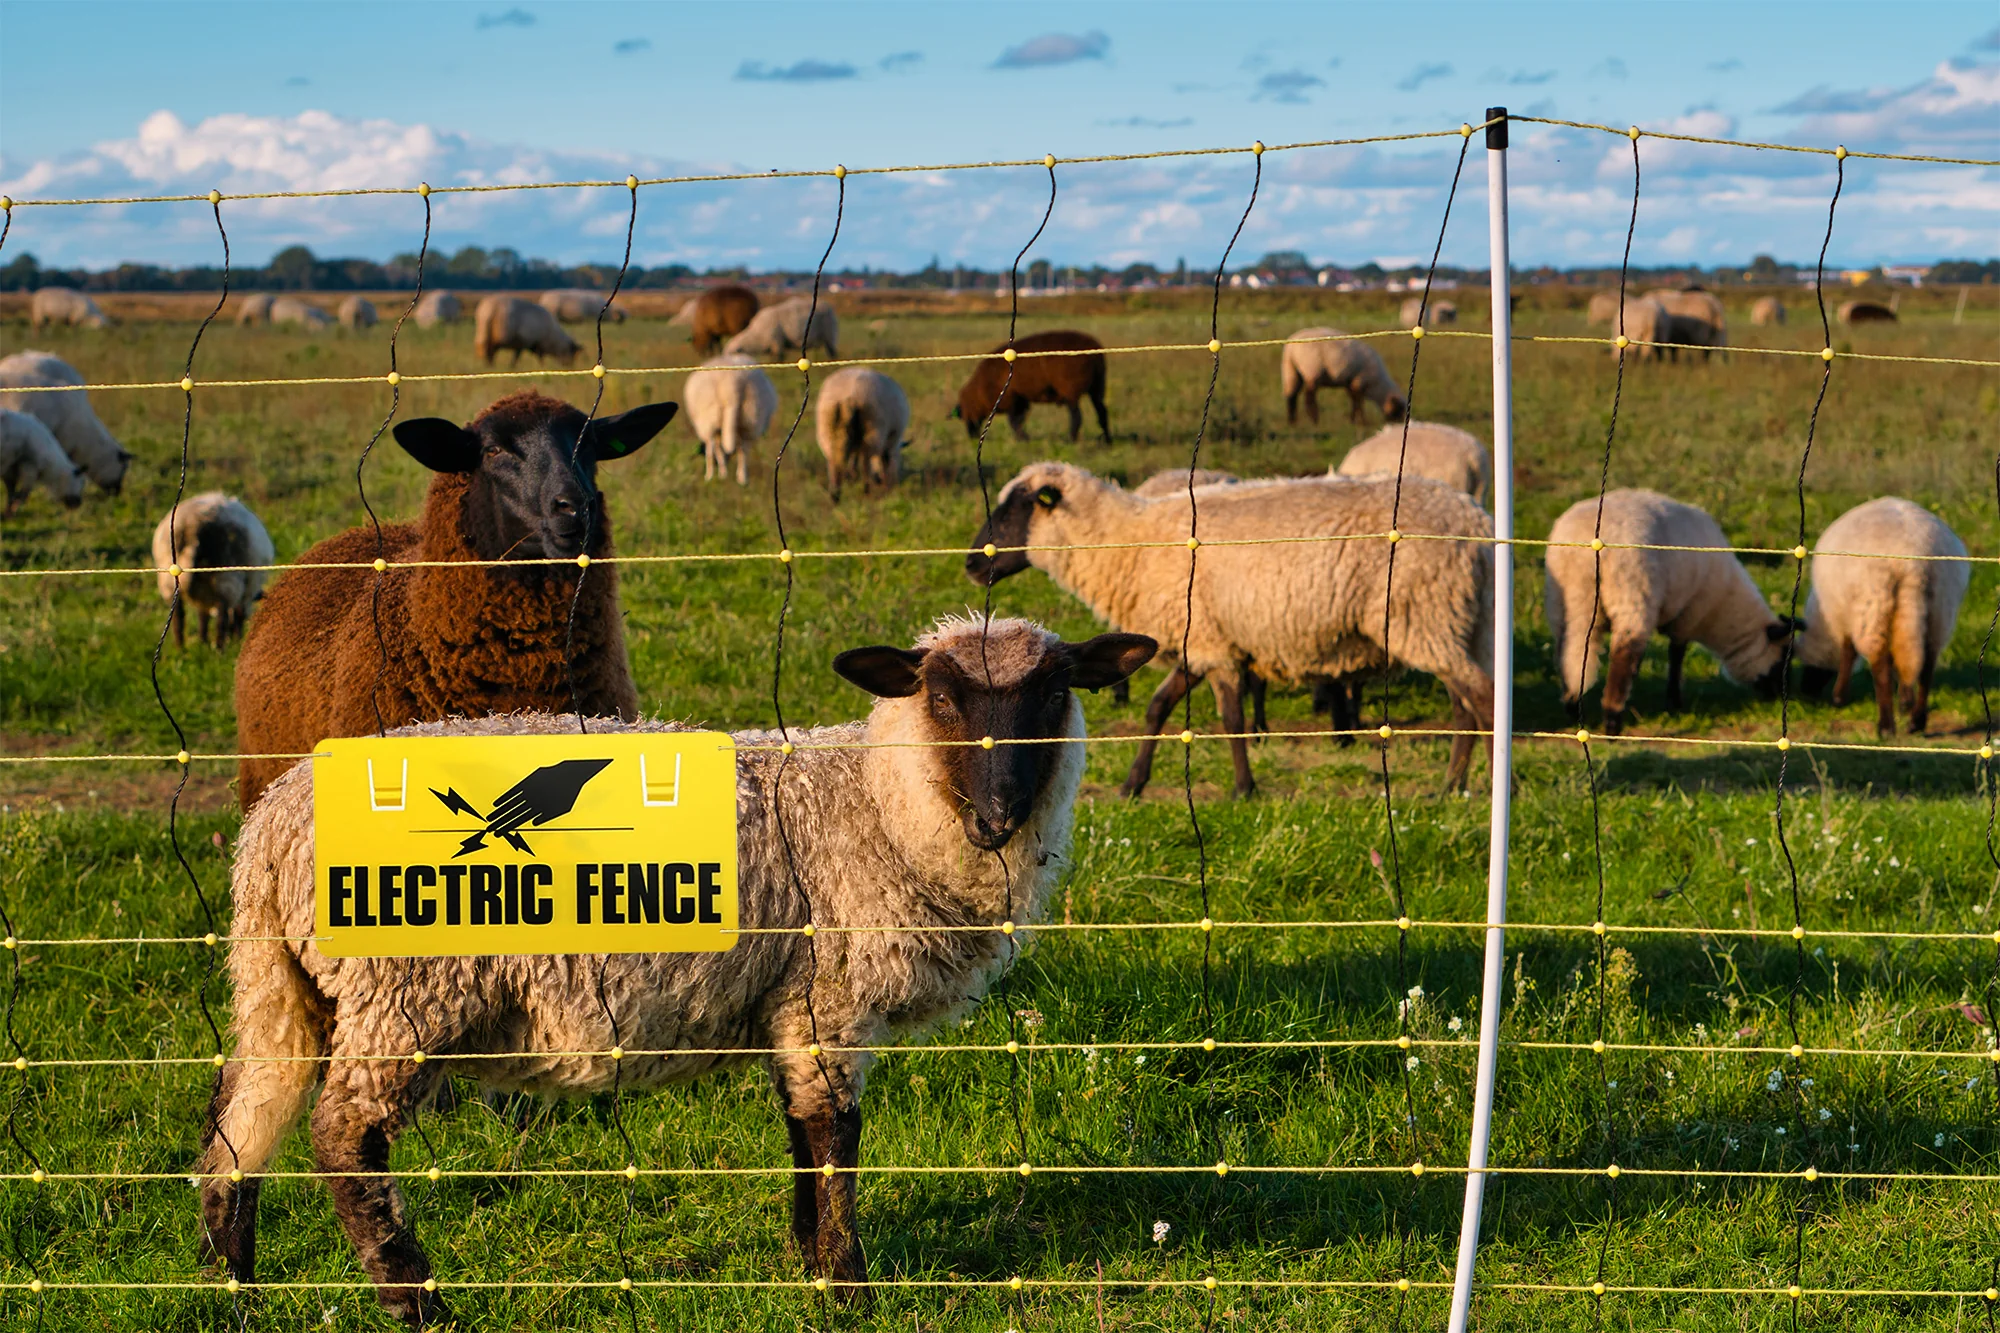 Insights on Electric Fencing in Agriculture